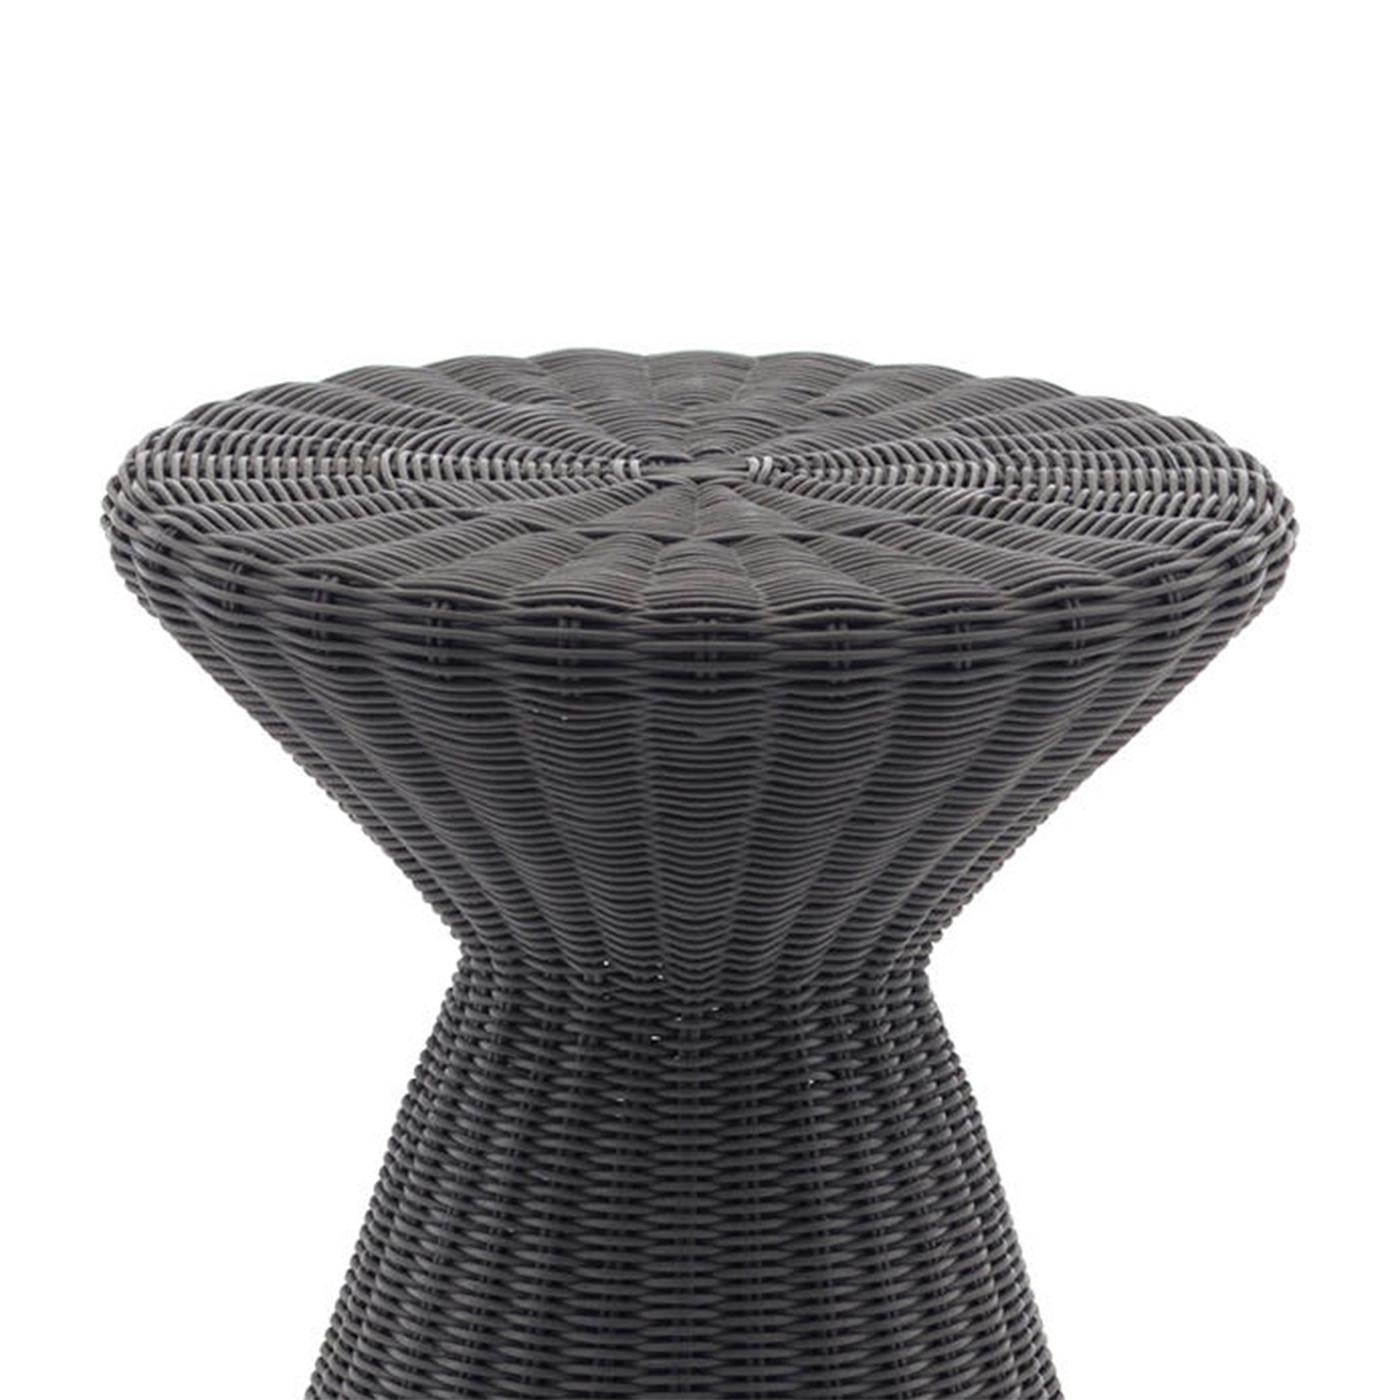 Side table coil black all
in handwoven rattan core, 
strong braided. In black finish.